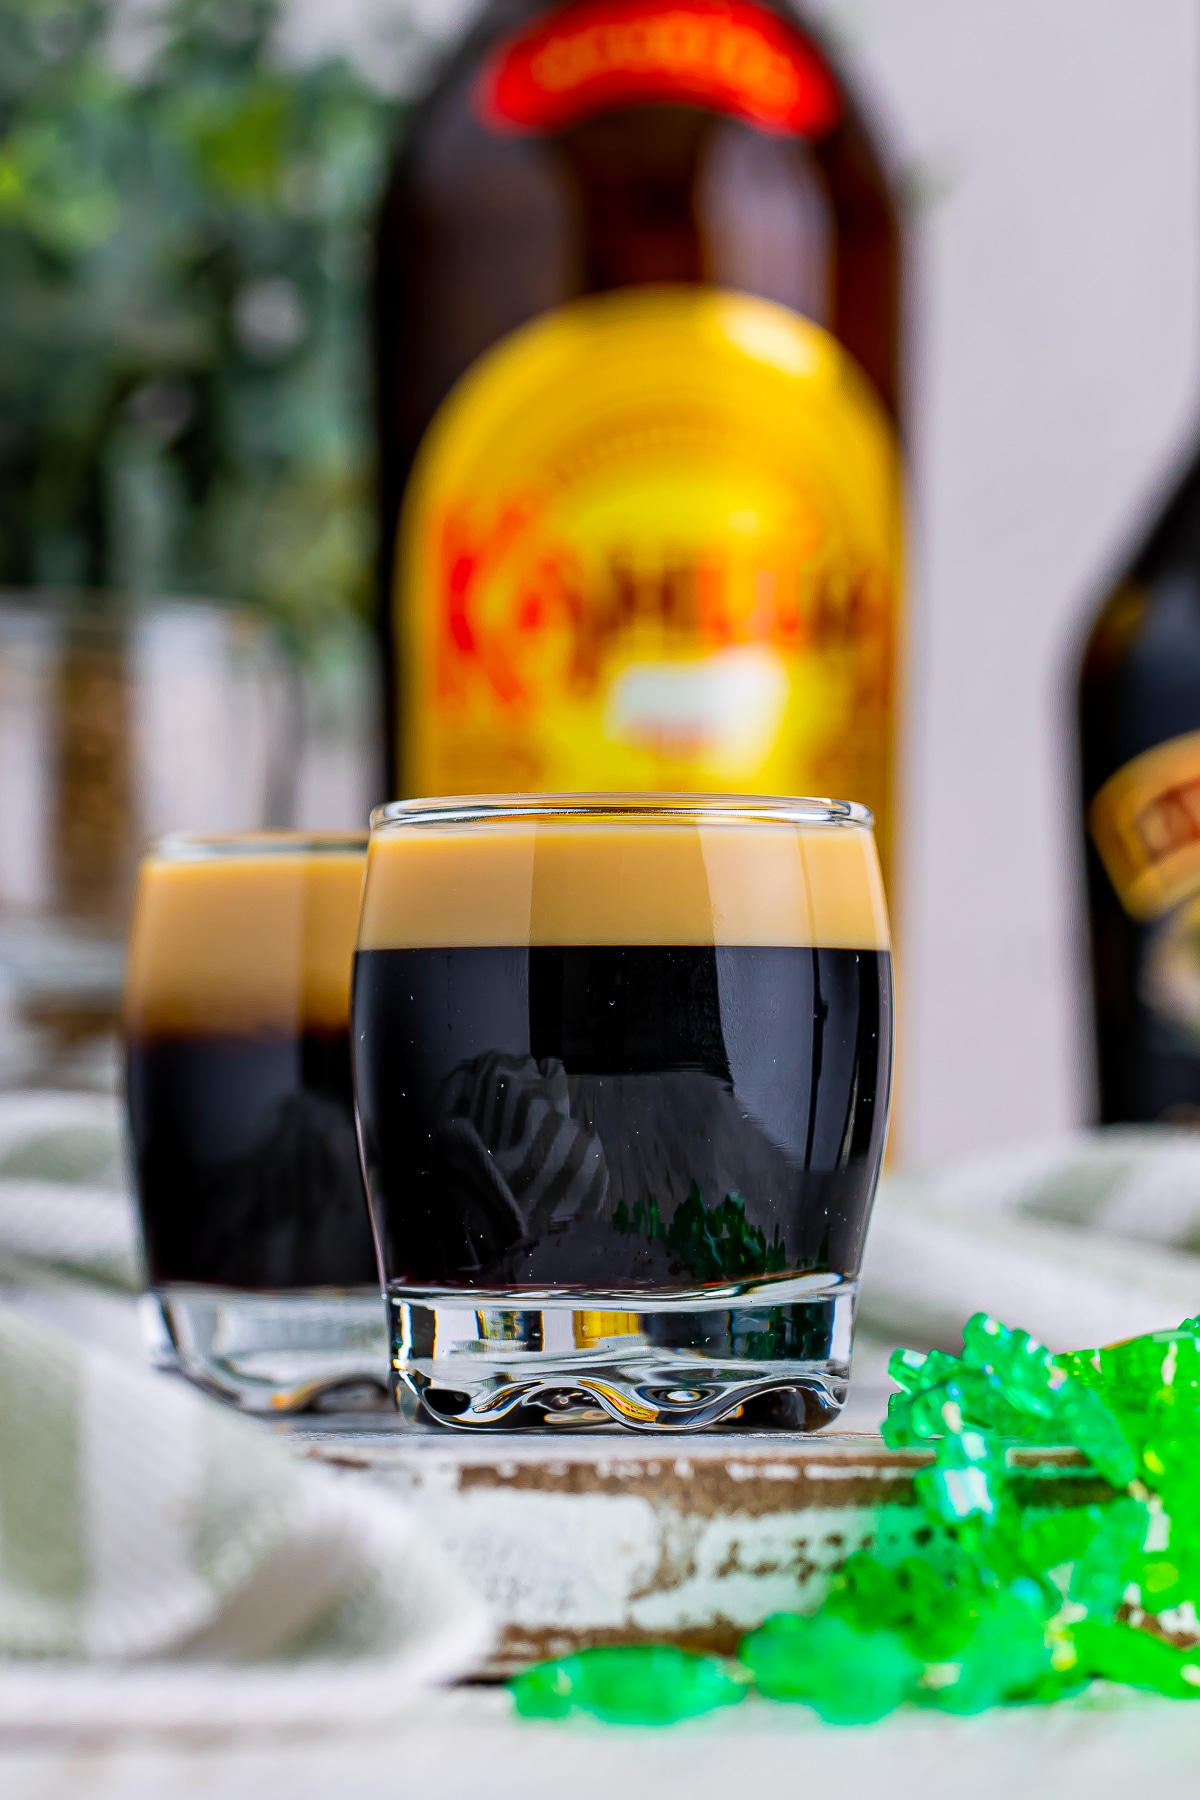 Close-up straight on image of Baby Guinness Shots with festive green clover necklace. Bottle of Kahlua in the background on a chipped wood serving board.